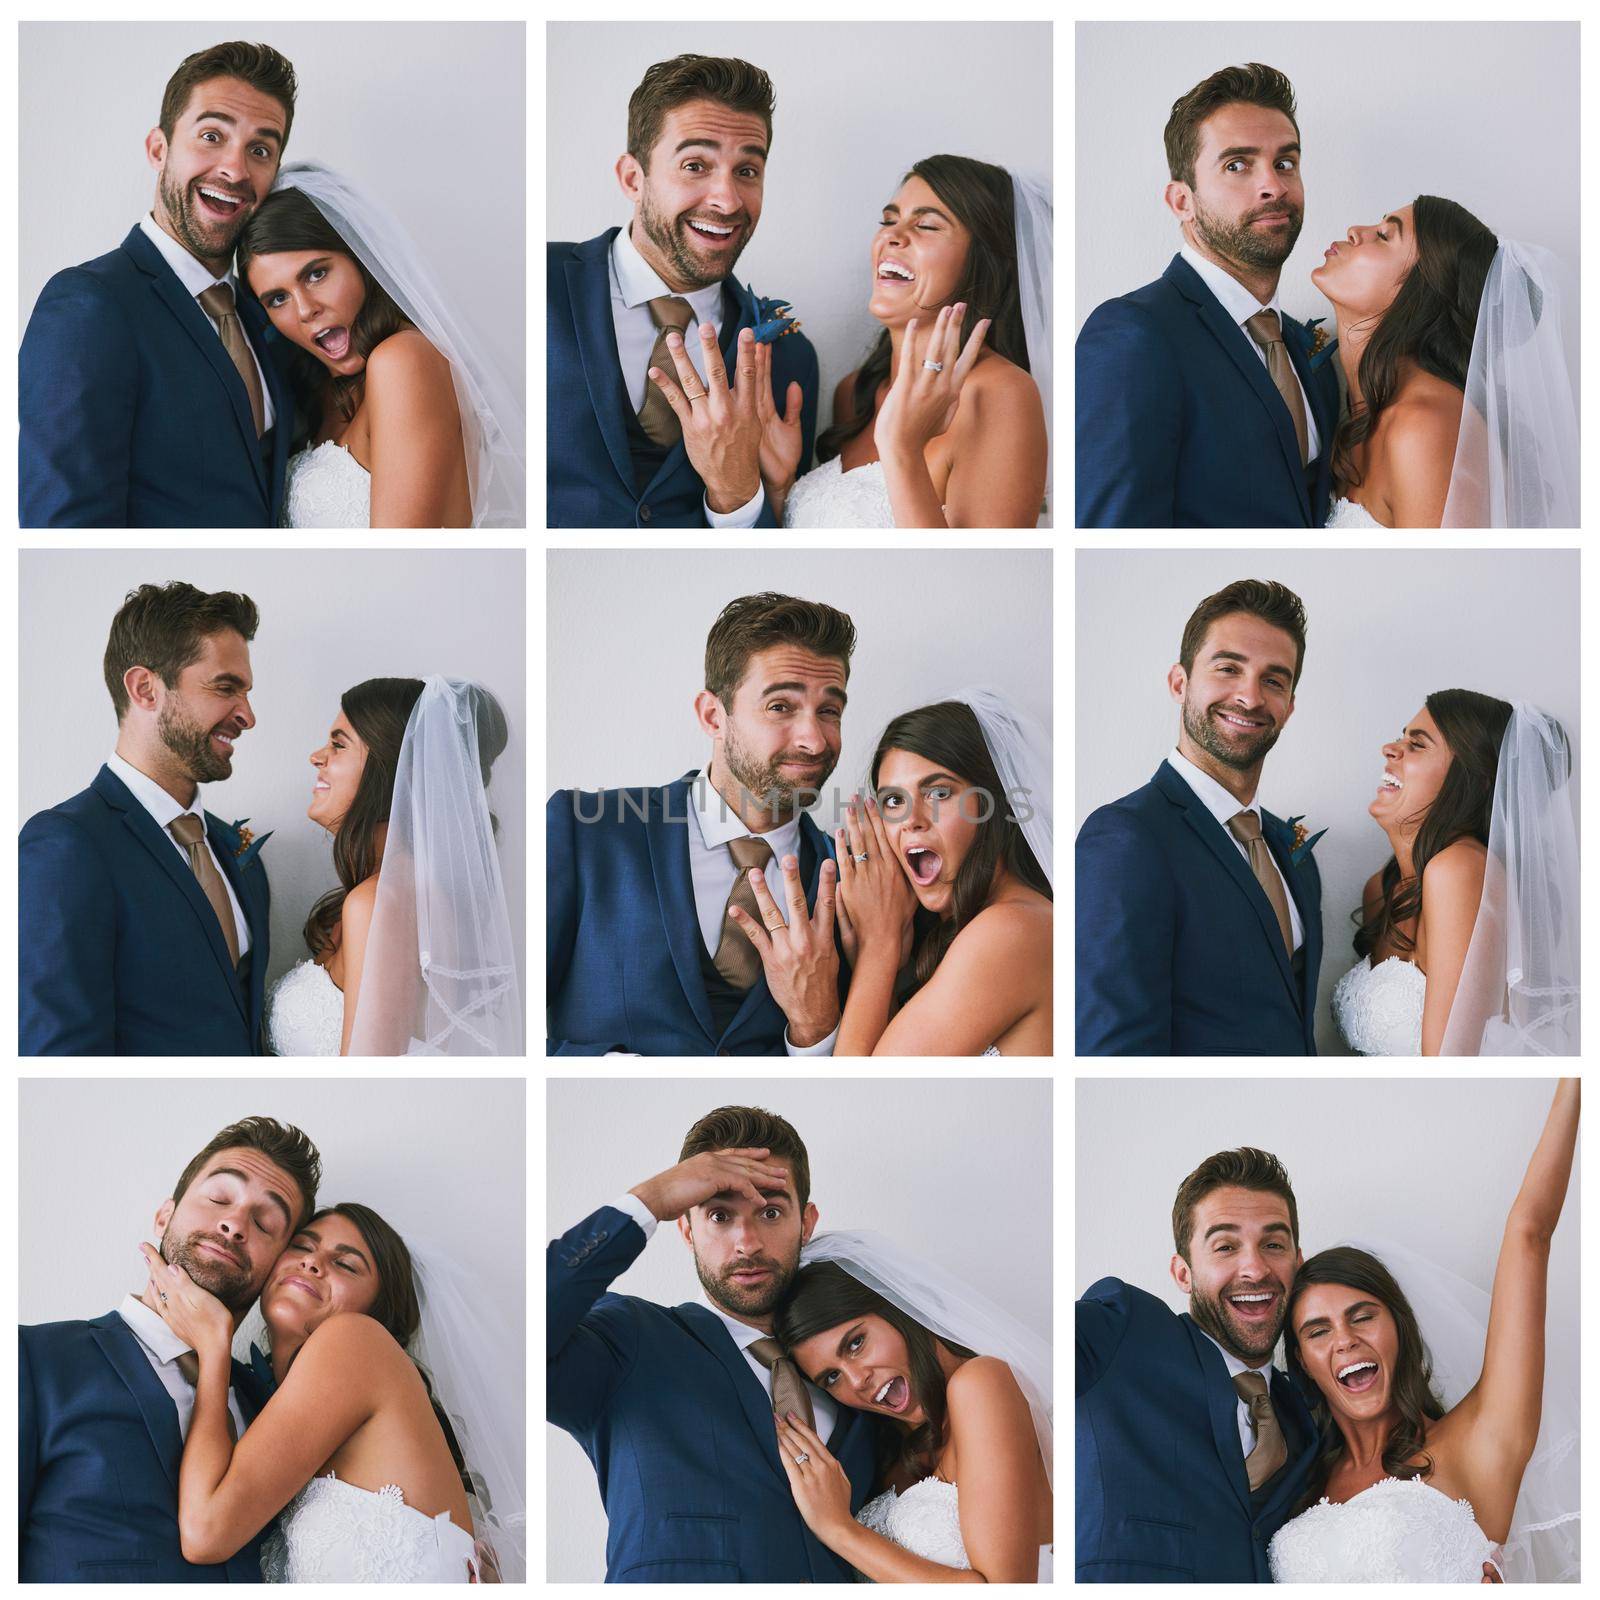 Composite studio image of a newly married young couple in various fun poses against a gray background.